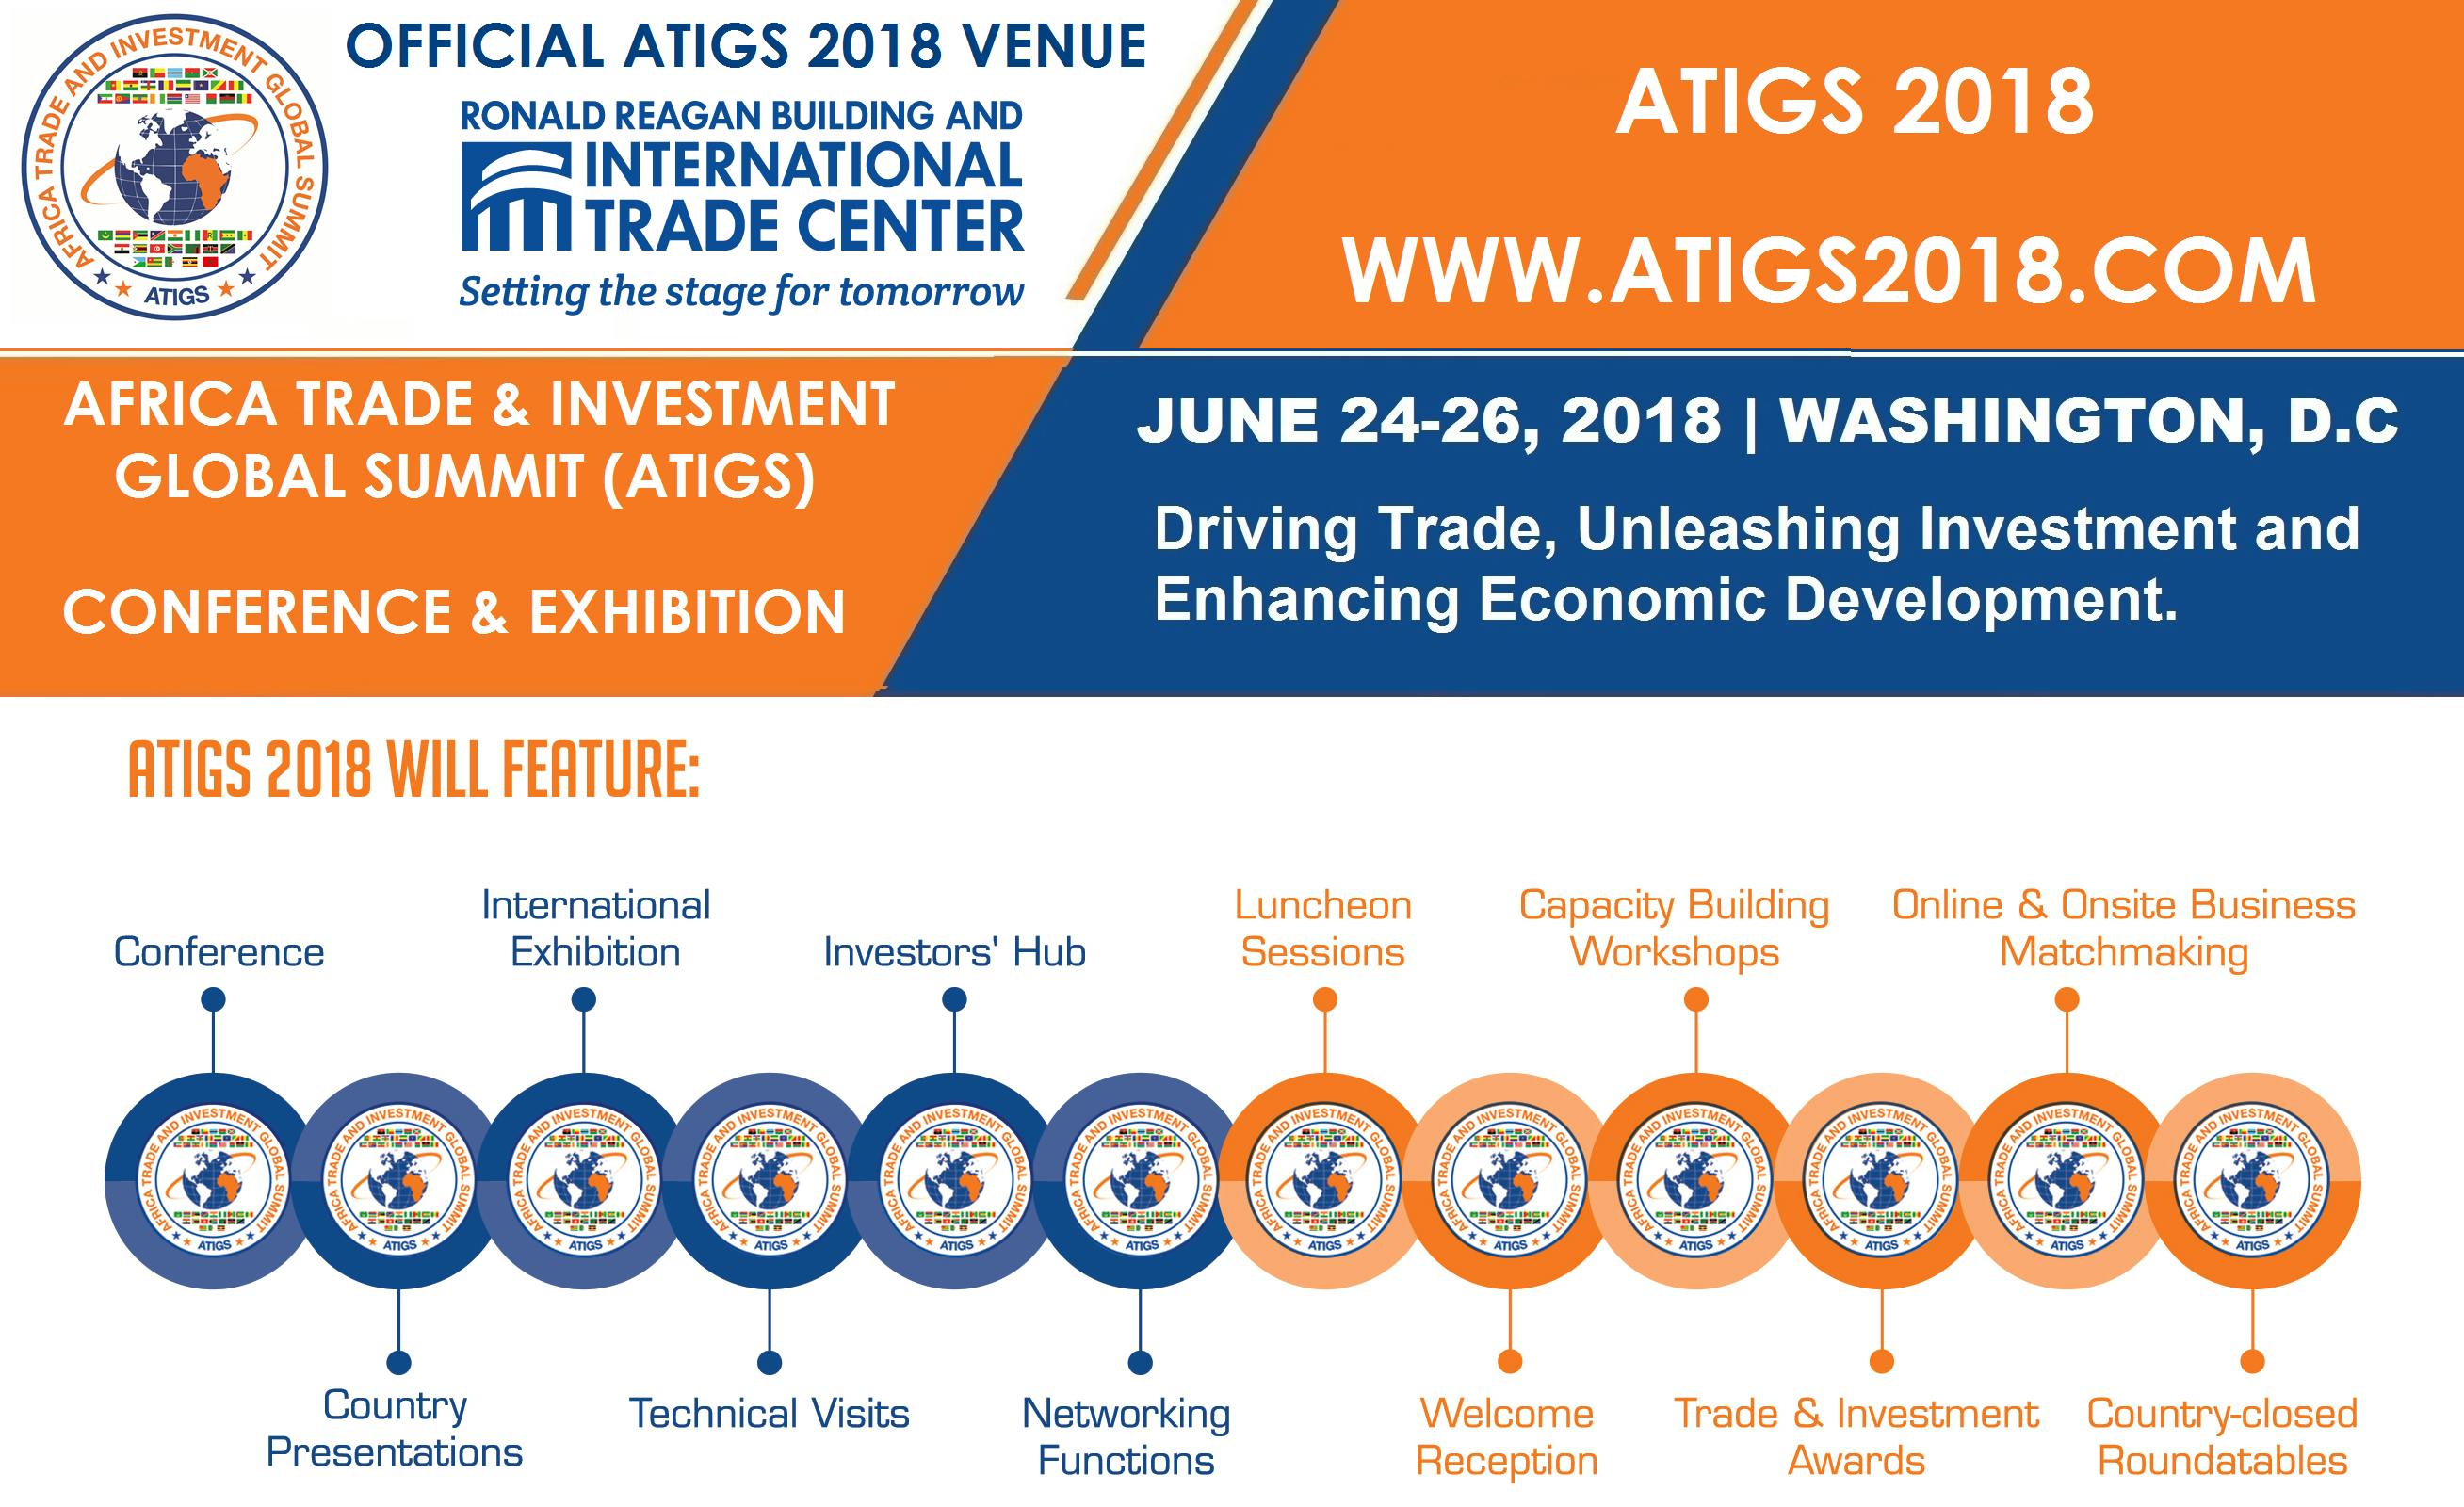 Africa Trade and Investment Global Summit: Conference & Exhibition 